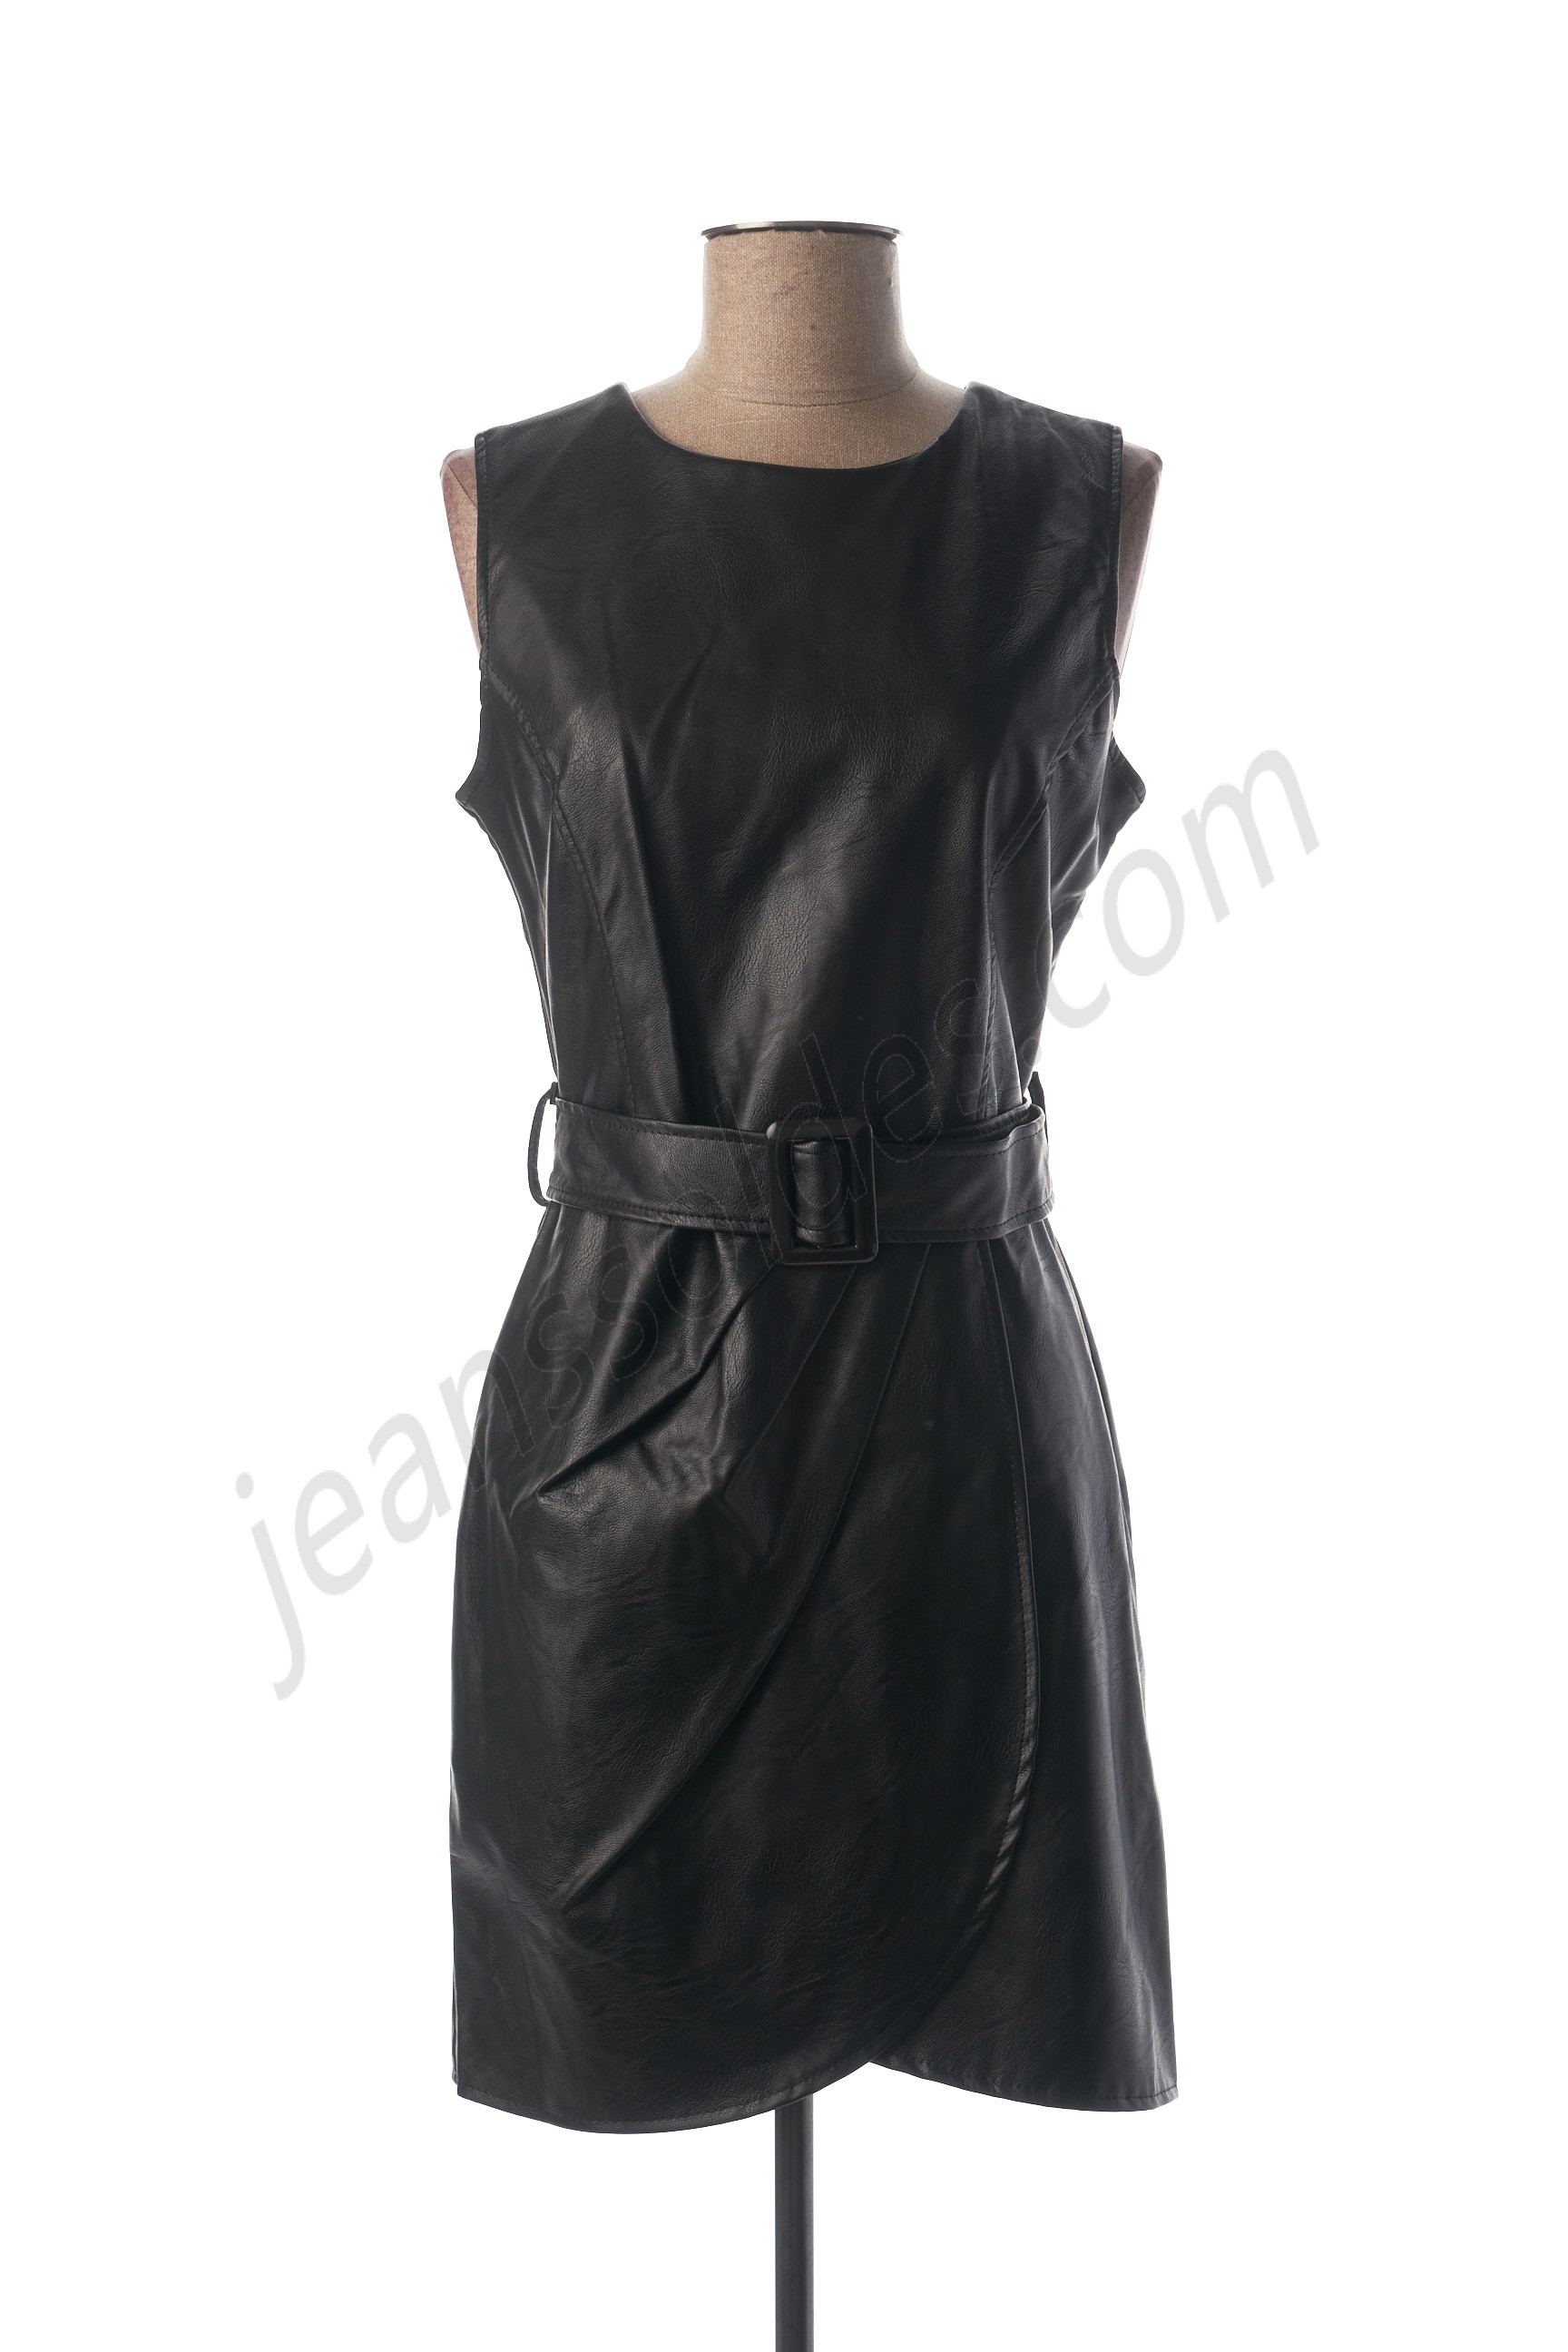 new collection-Robe courte déstockage - new collection-Robe courte déstockage